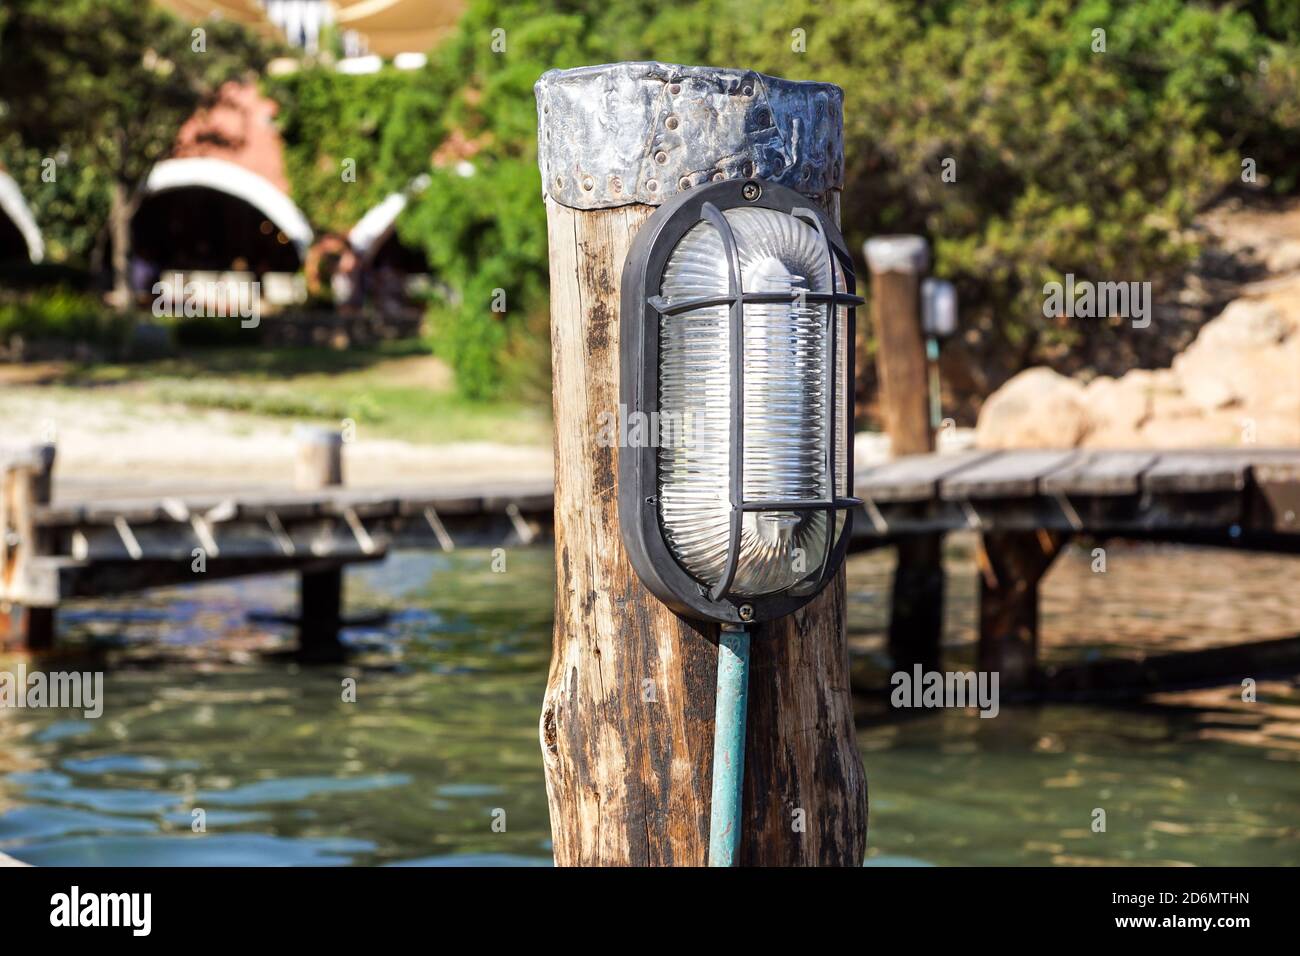 Lamp light with Illumination on the concrete floor for lighting on pier and fishing boat, ferry, yacht Stock Photo